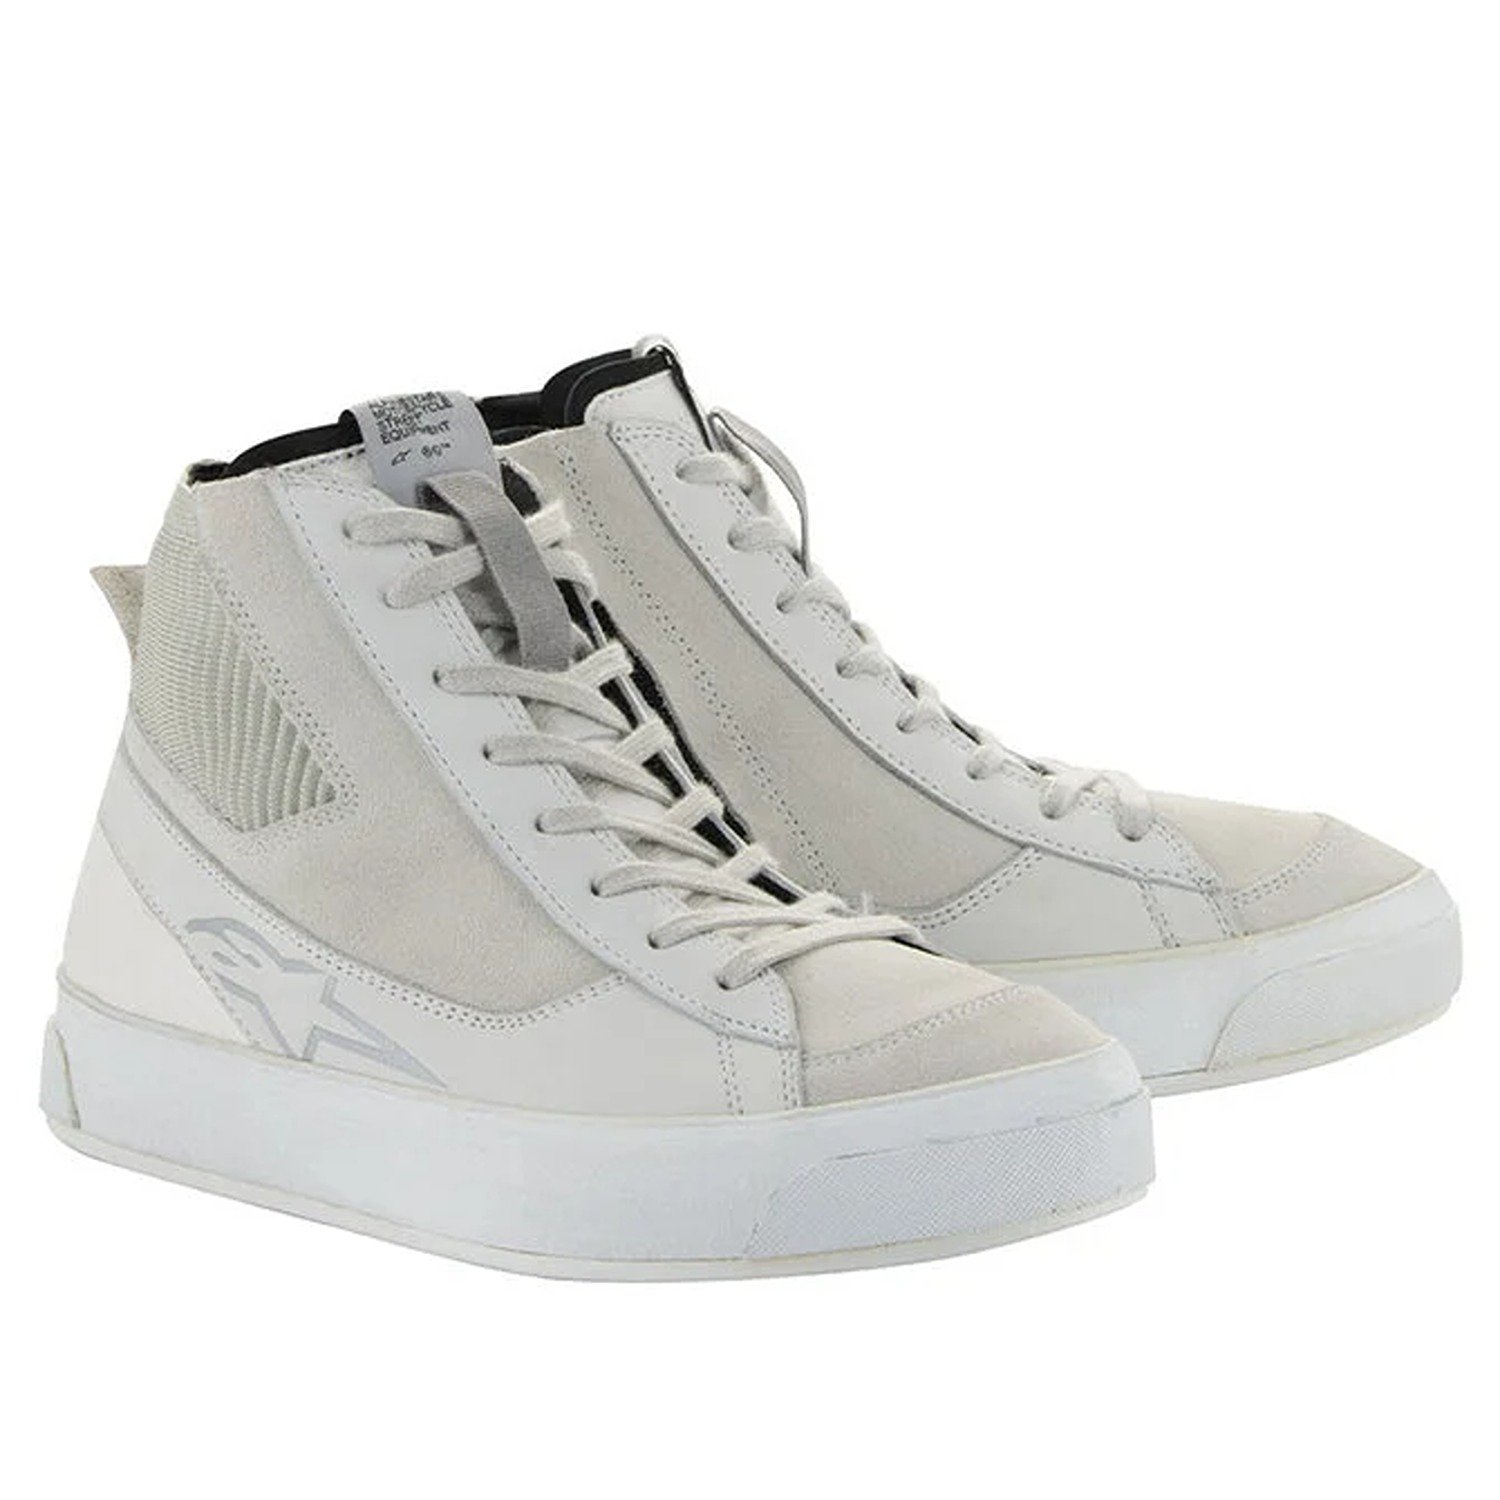 Image of Alpinestars Stated Shoes White Cool Gray Taille US 8